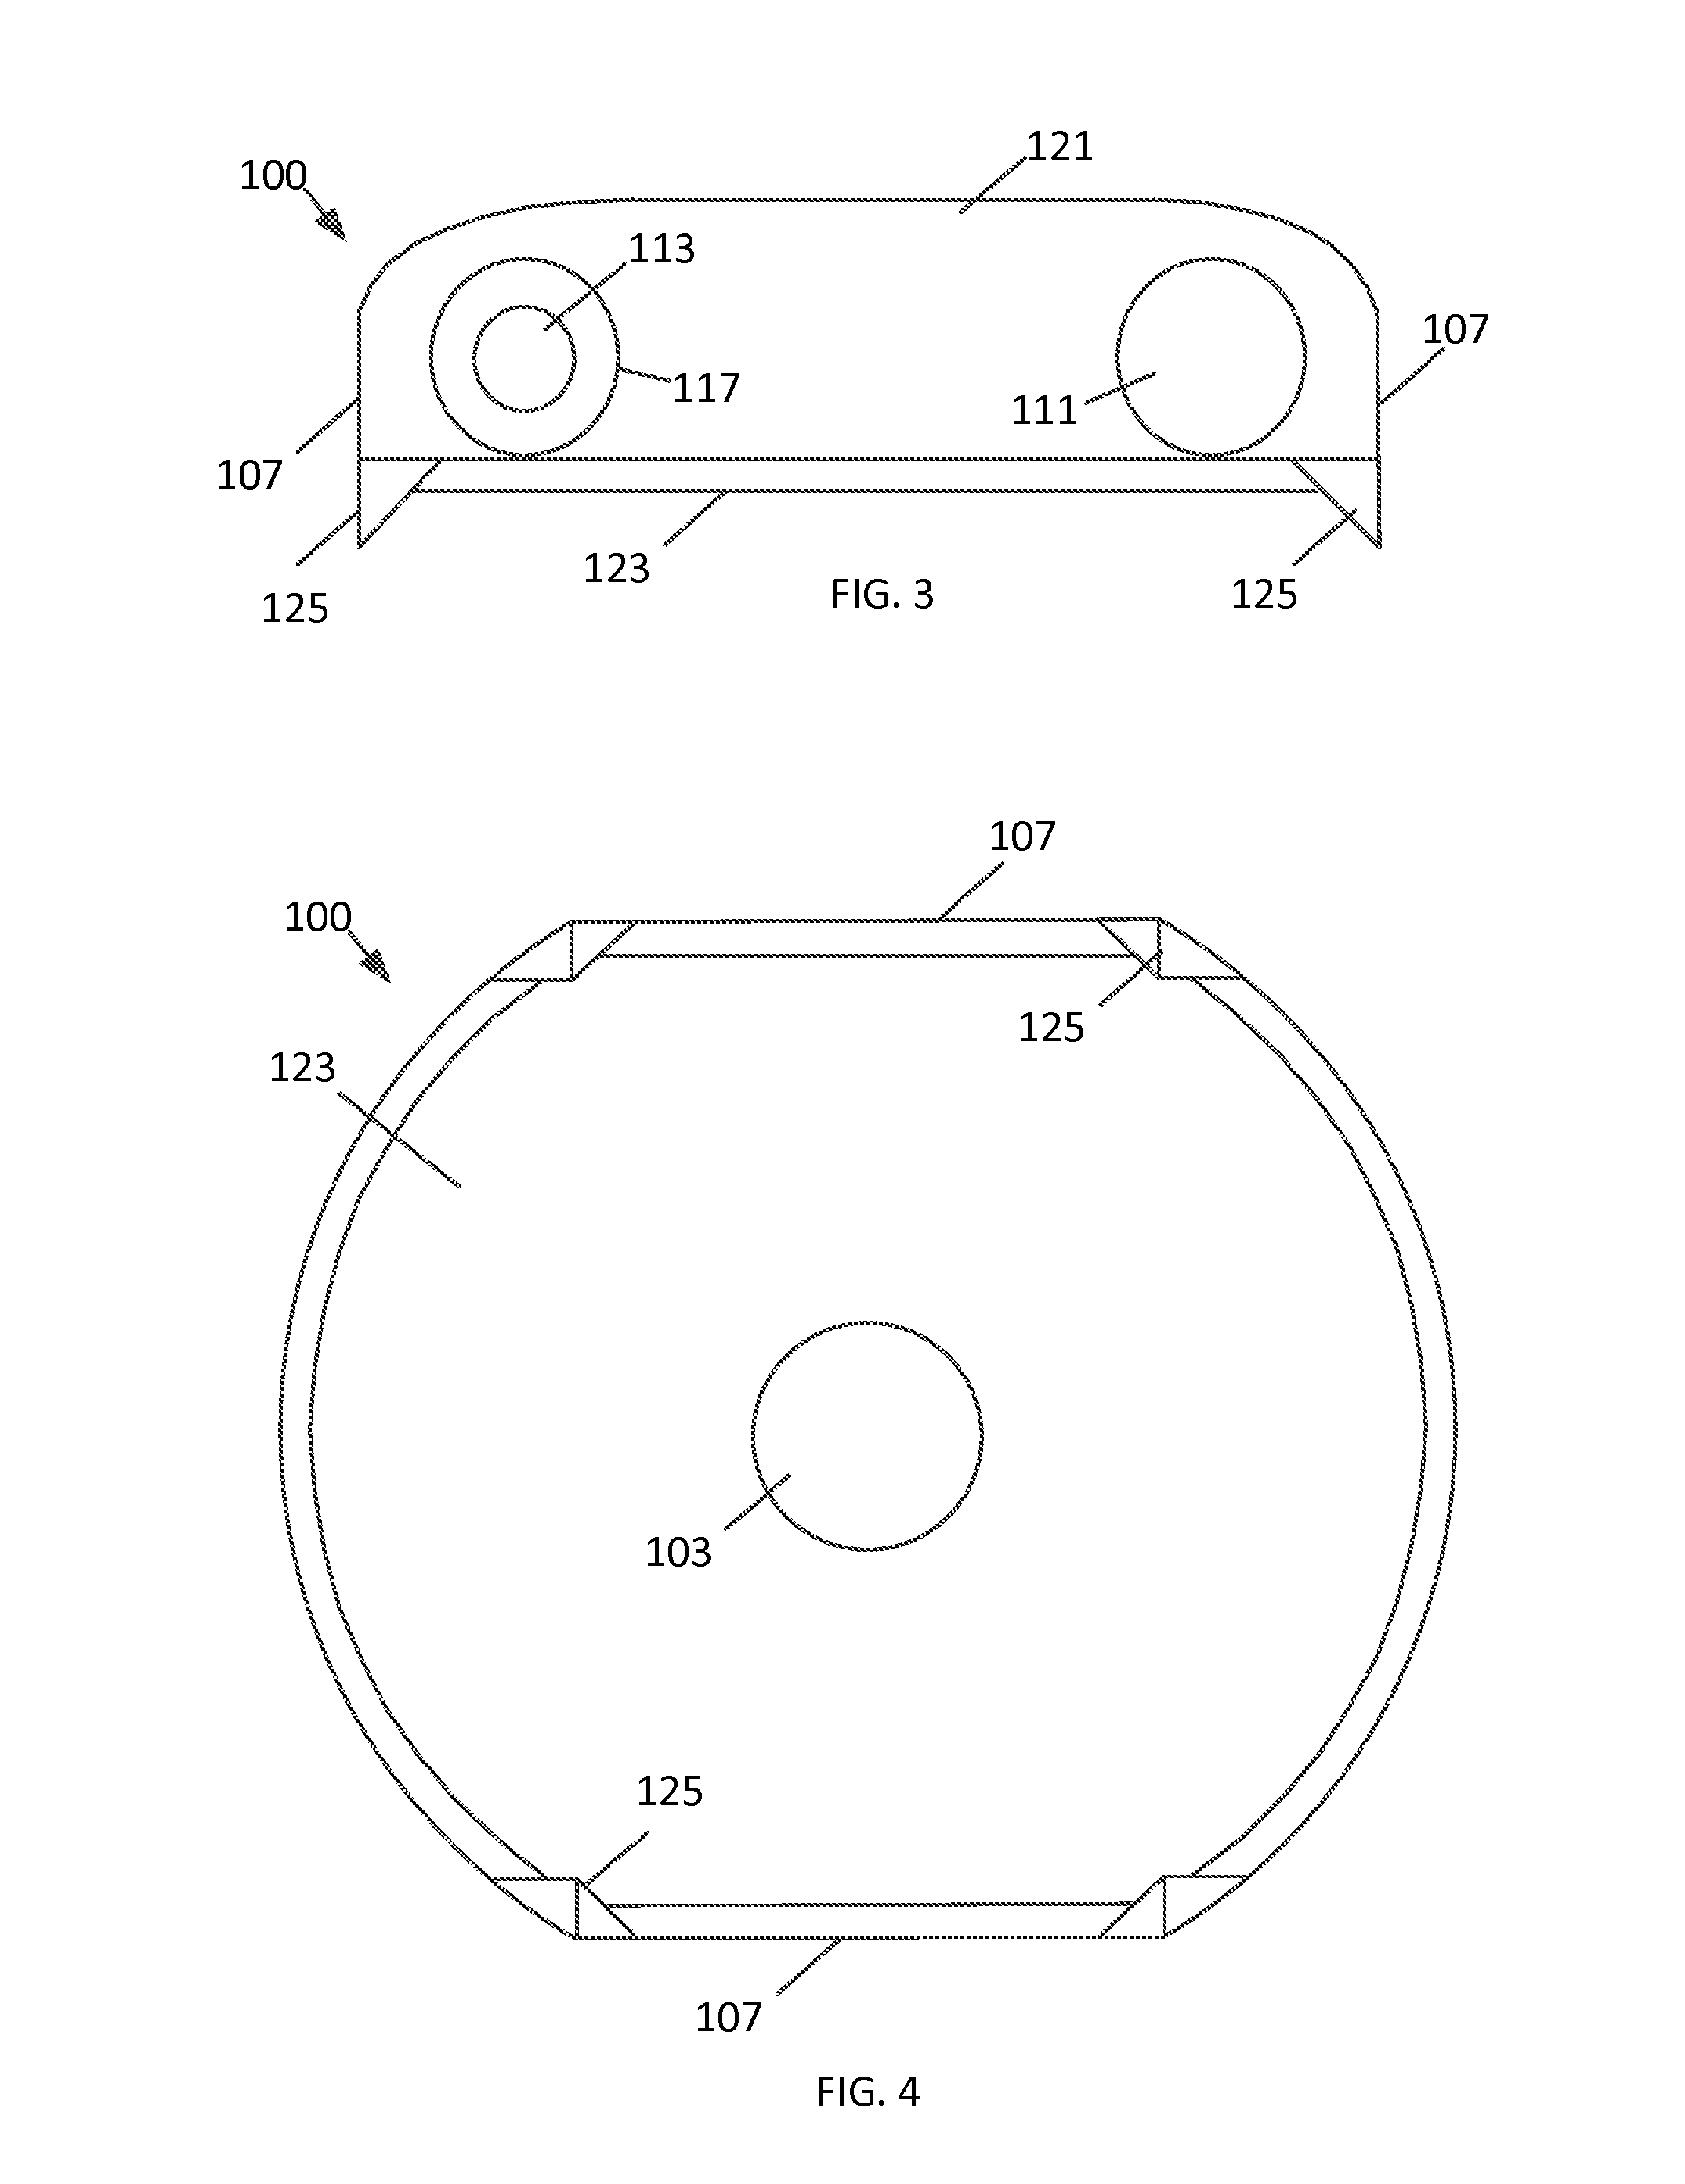 Cable anchor systems and methods